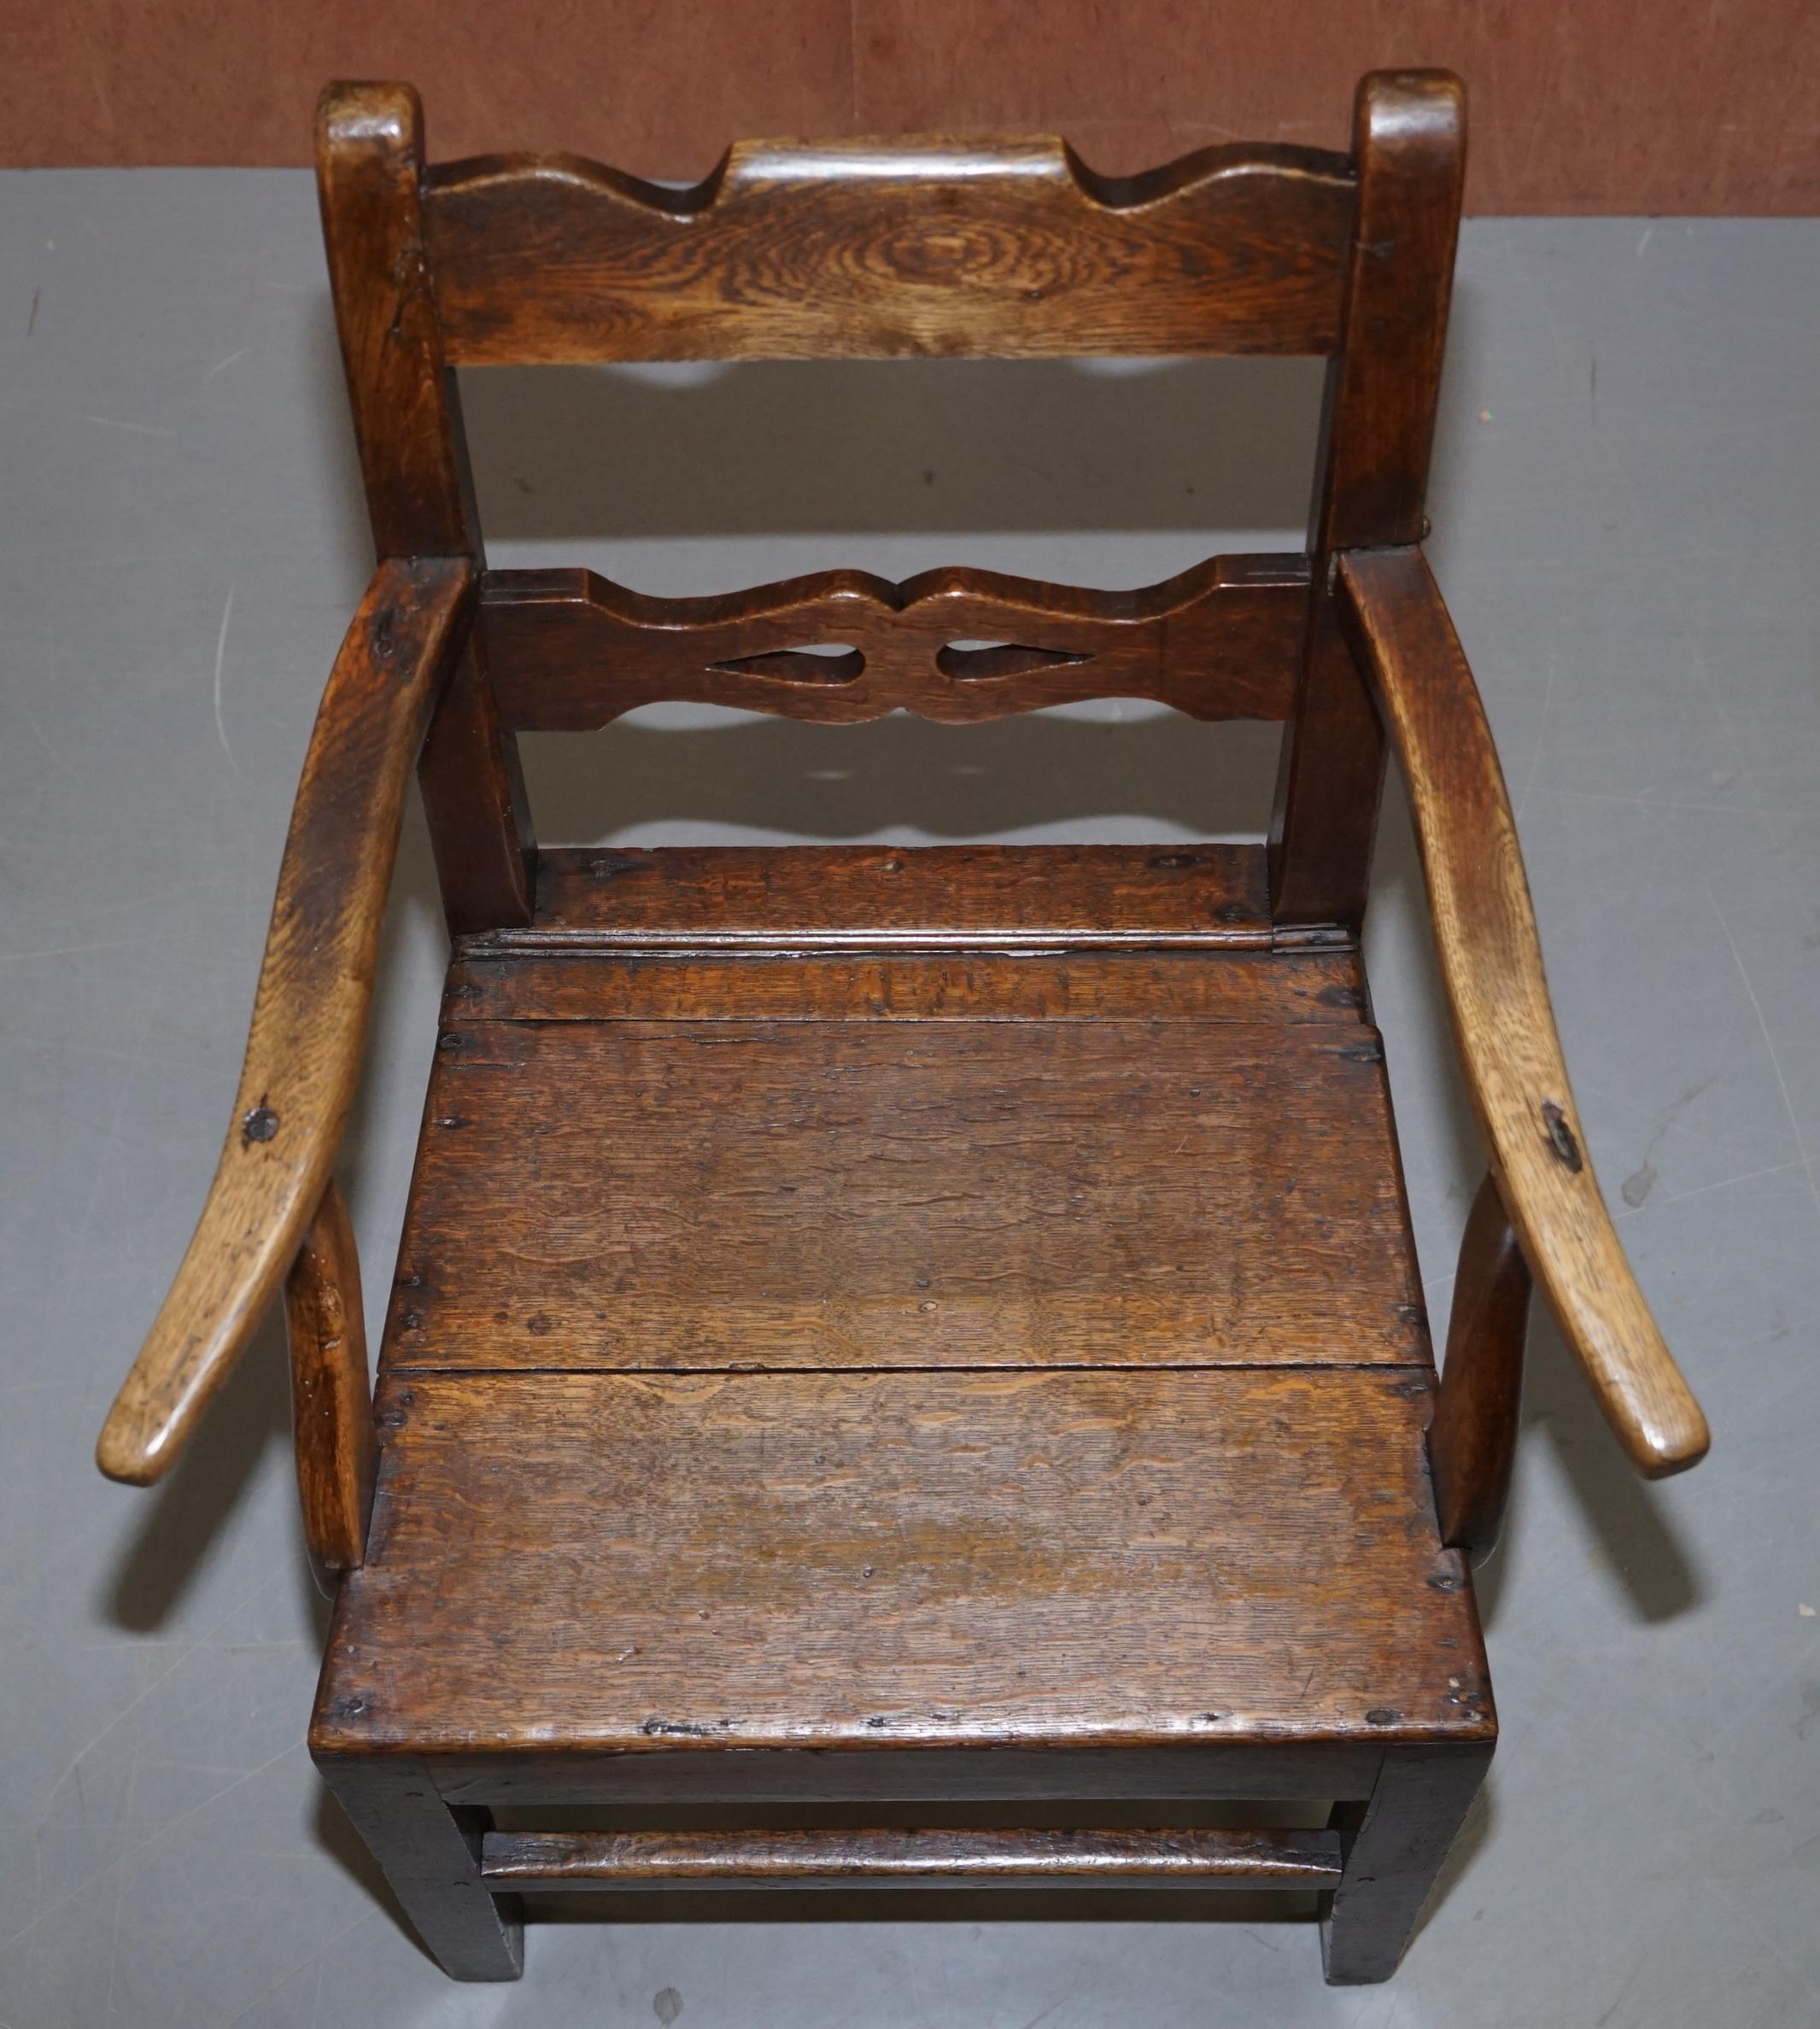 Hand-Crafted Lovely George II circa 1760 Primitive Carver Armchair Original Period Repairs For Sale